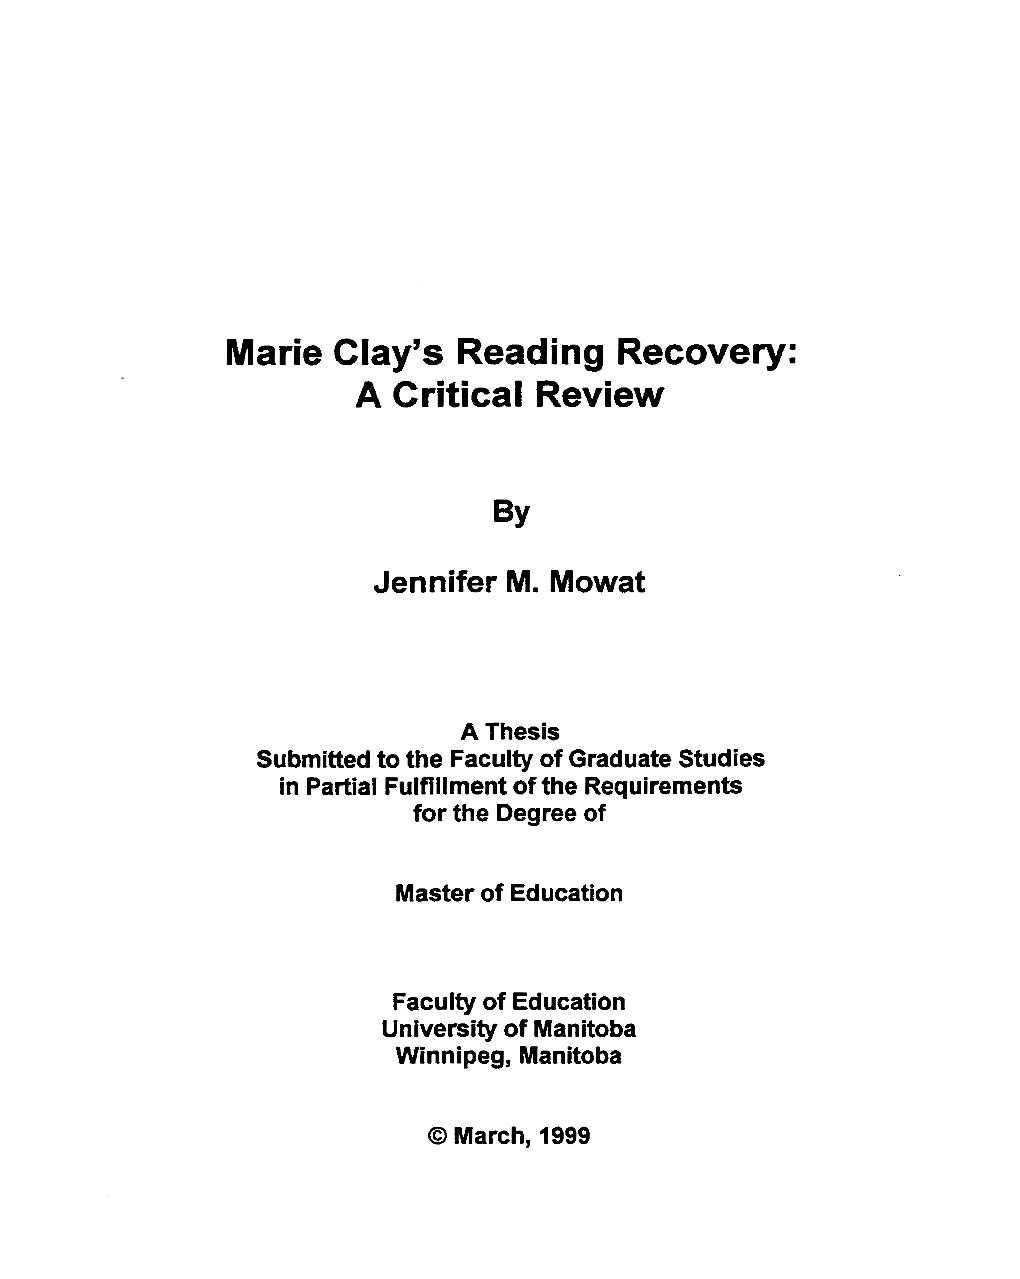 Marie Clay's Reading Recovery: a Critical Review